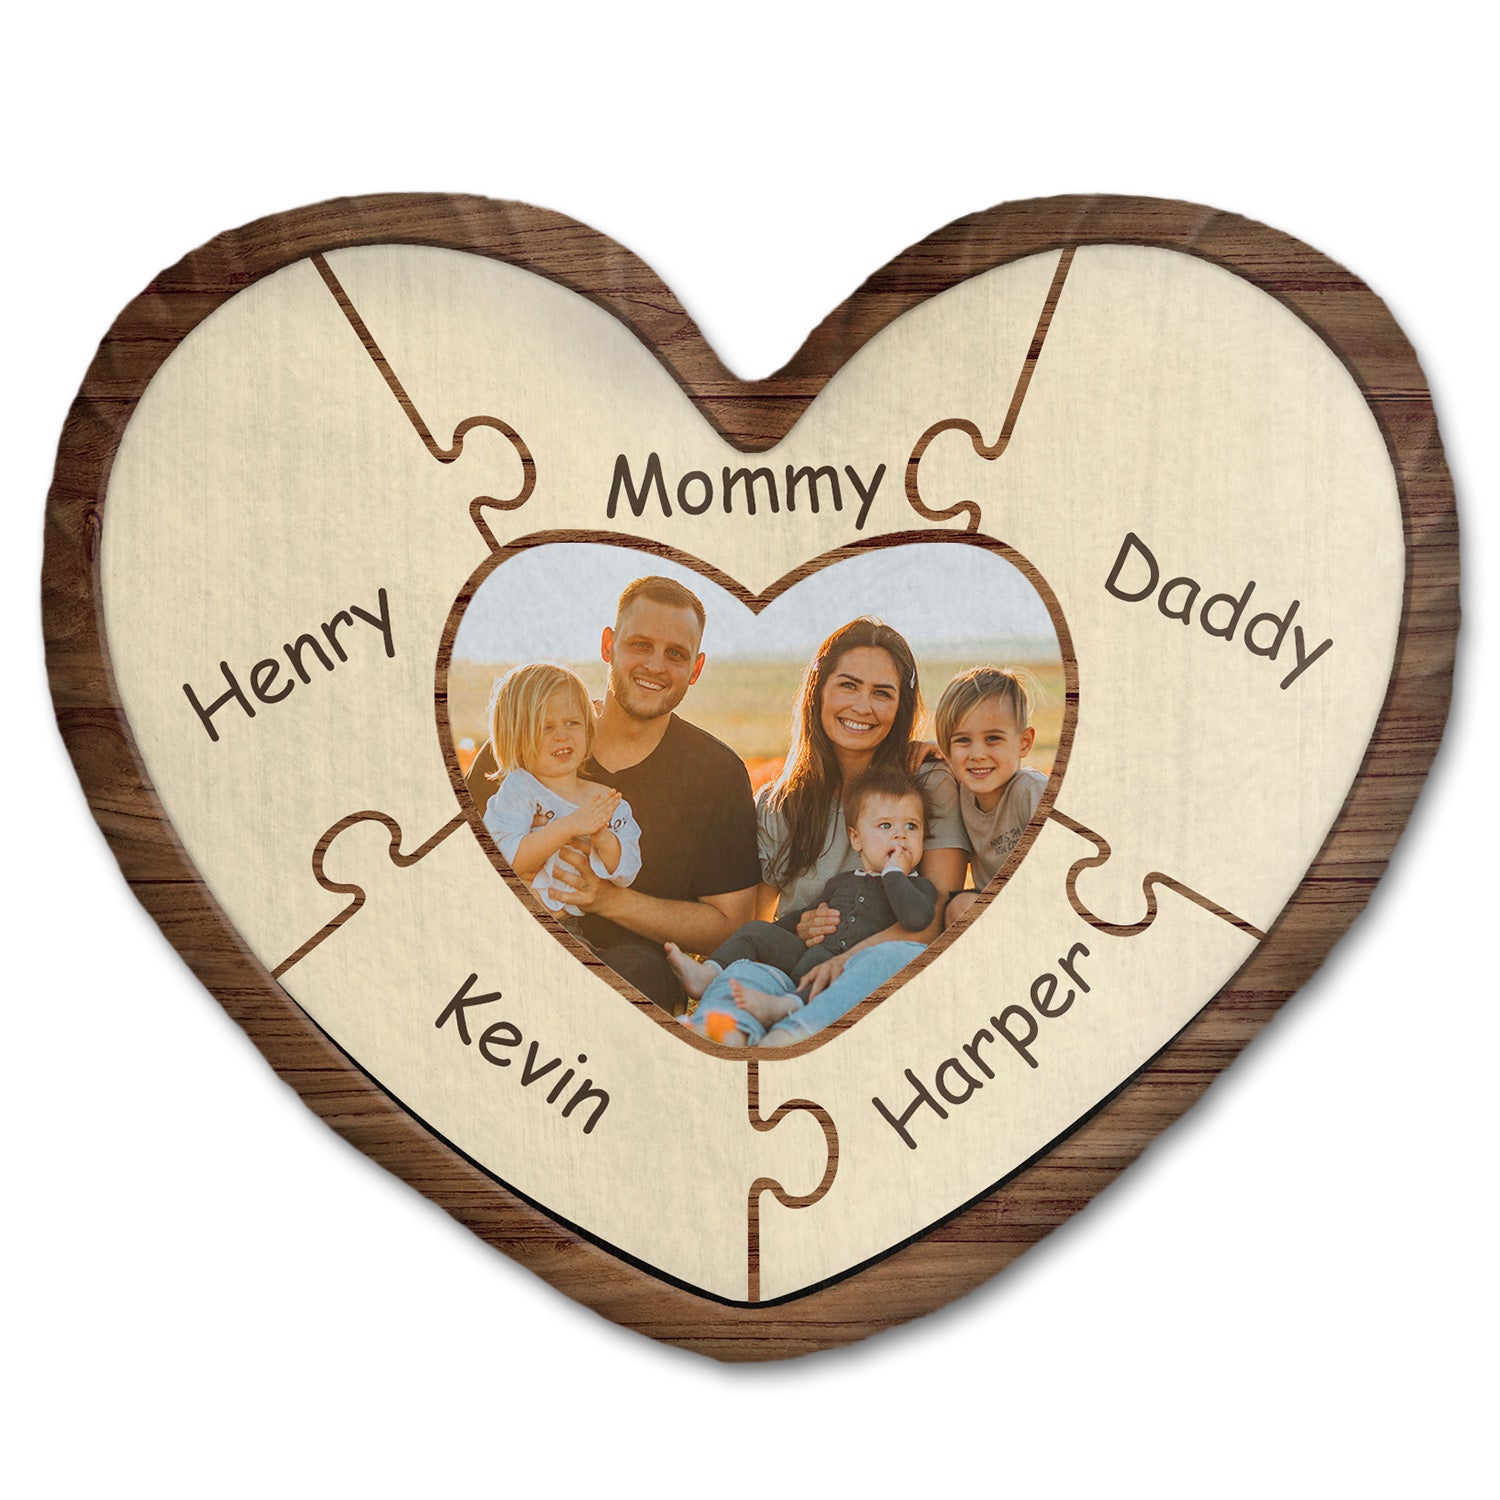 Custom Photo Puzzle Name - Birthday, Holiday Gift For Parent, Couple, Grandparent - Personalized Heart Shaped Pillow